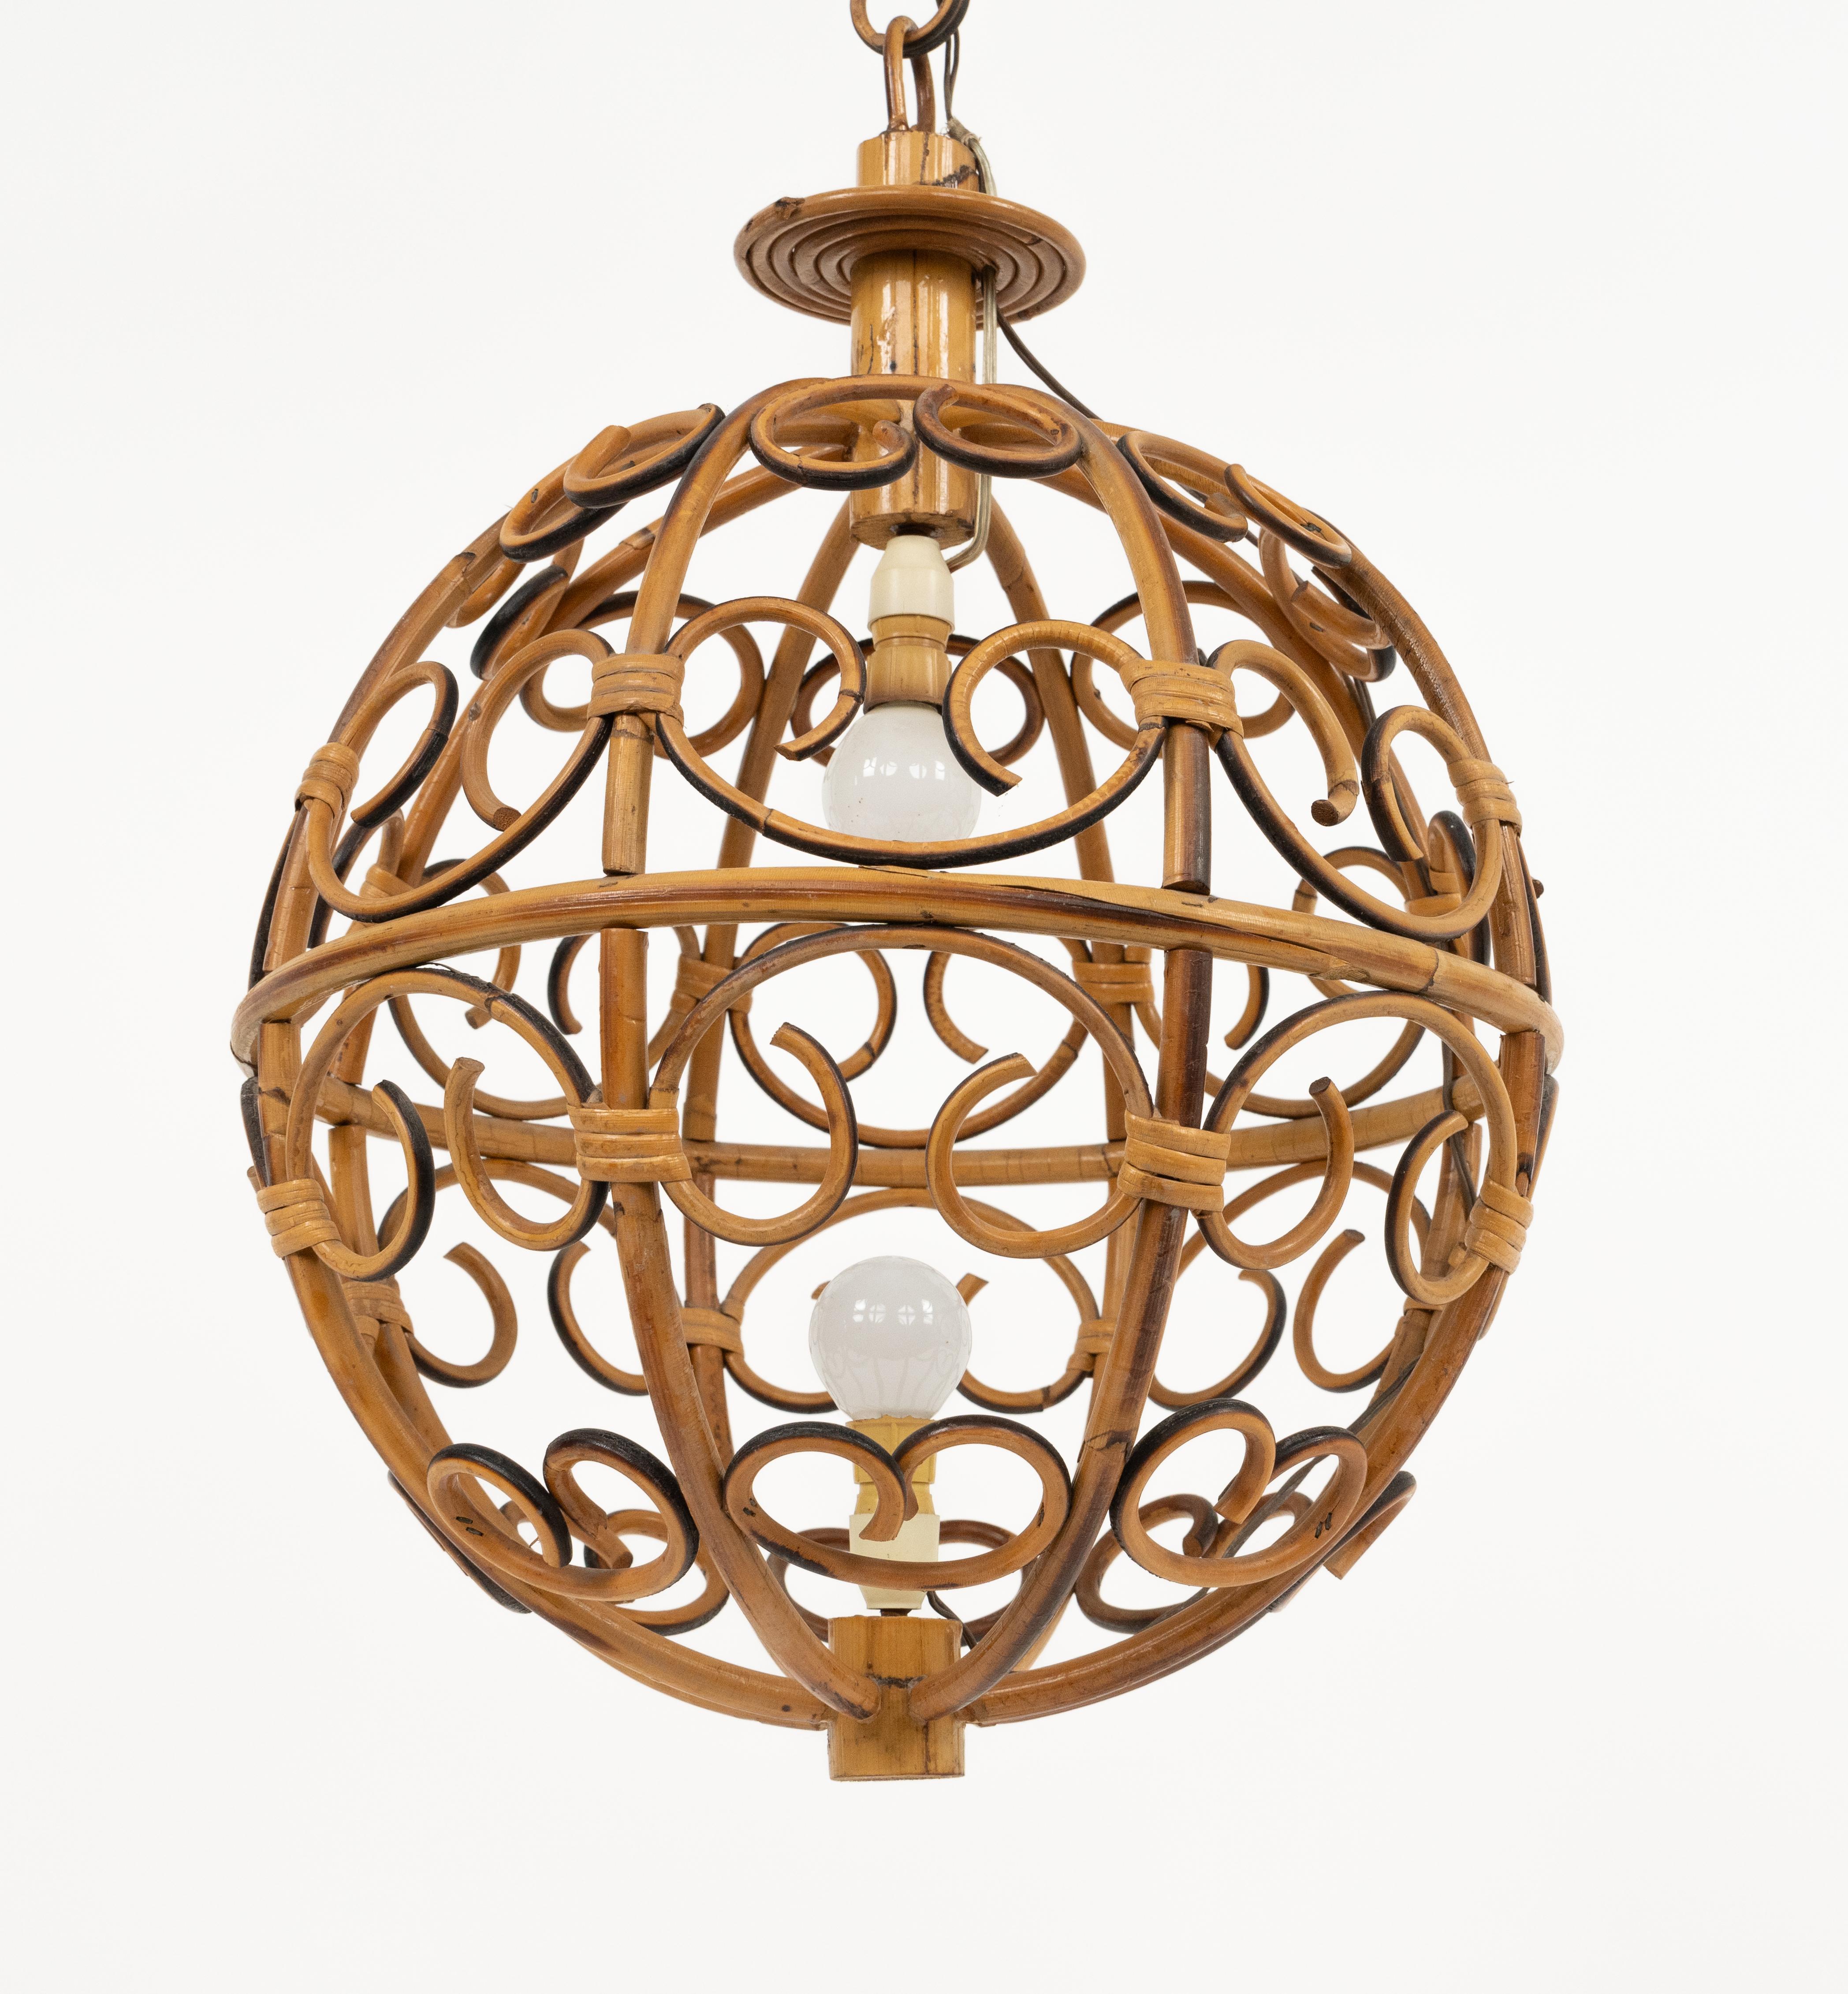 Midcentury Globe Chandelier in Rattan and Bamboo, Italy 1960s For Sale 3